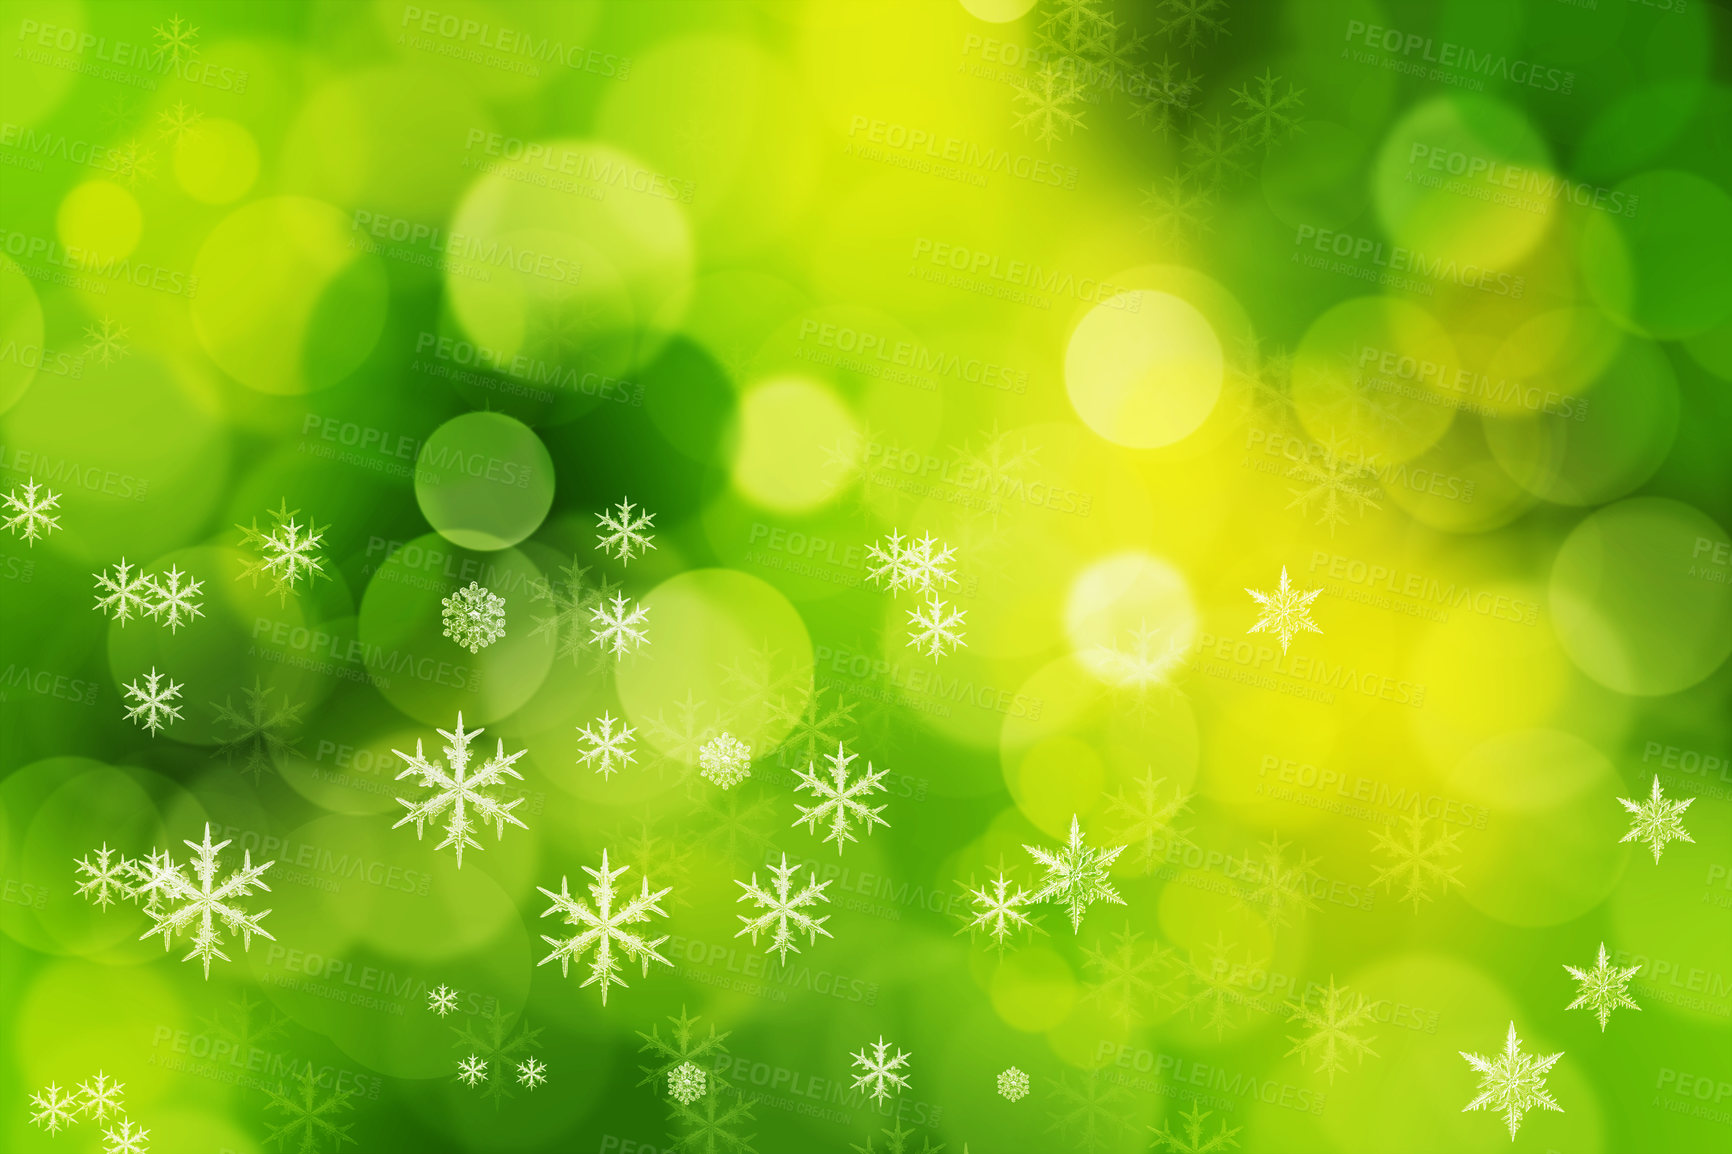 Buy stock photo Abstract, graphic and green bokeh with snowflake, Christmas theme, decor and creativity with color. Wallpaper, effects and sparkle or shine with pattern, stars and creative design with shape